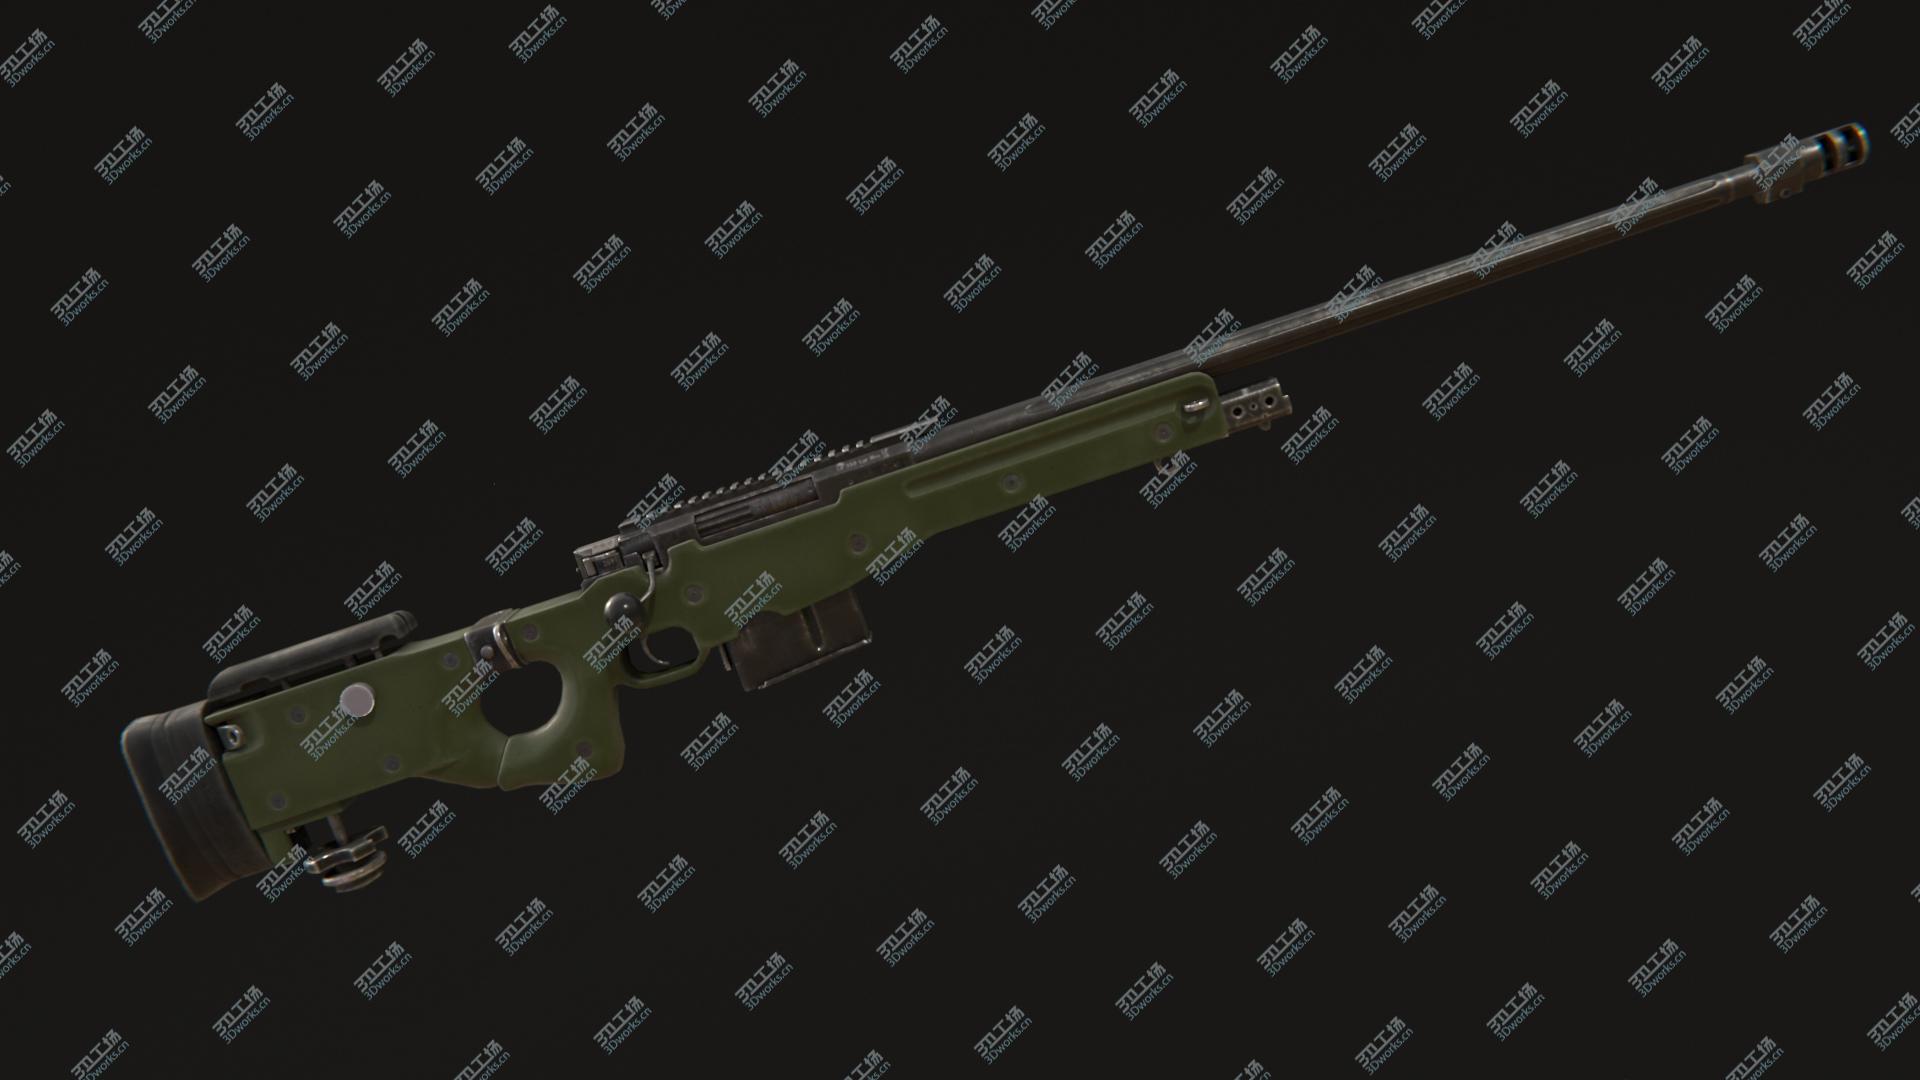 images/goods_img/202105071/3D AWM  Accuracy International L96A3 Arctic Warfare .338 Lapua Magnum Green Color Without Scope/3.jpg